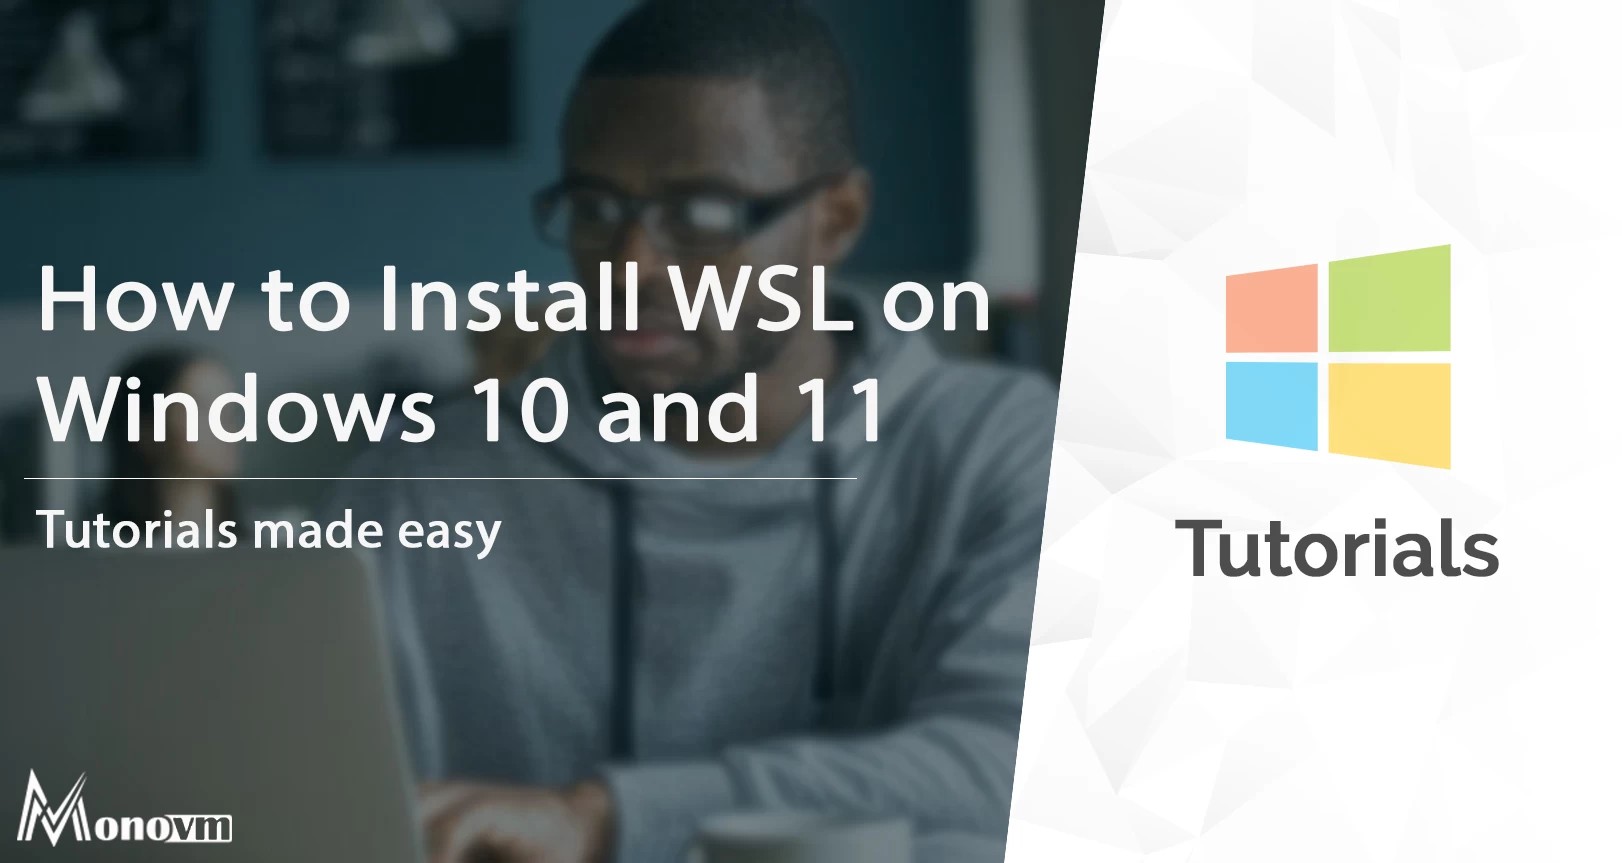 How to Install WSL & Upgrade to WSL2 on Windows 10 and Windows 11